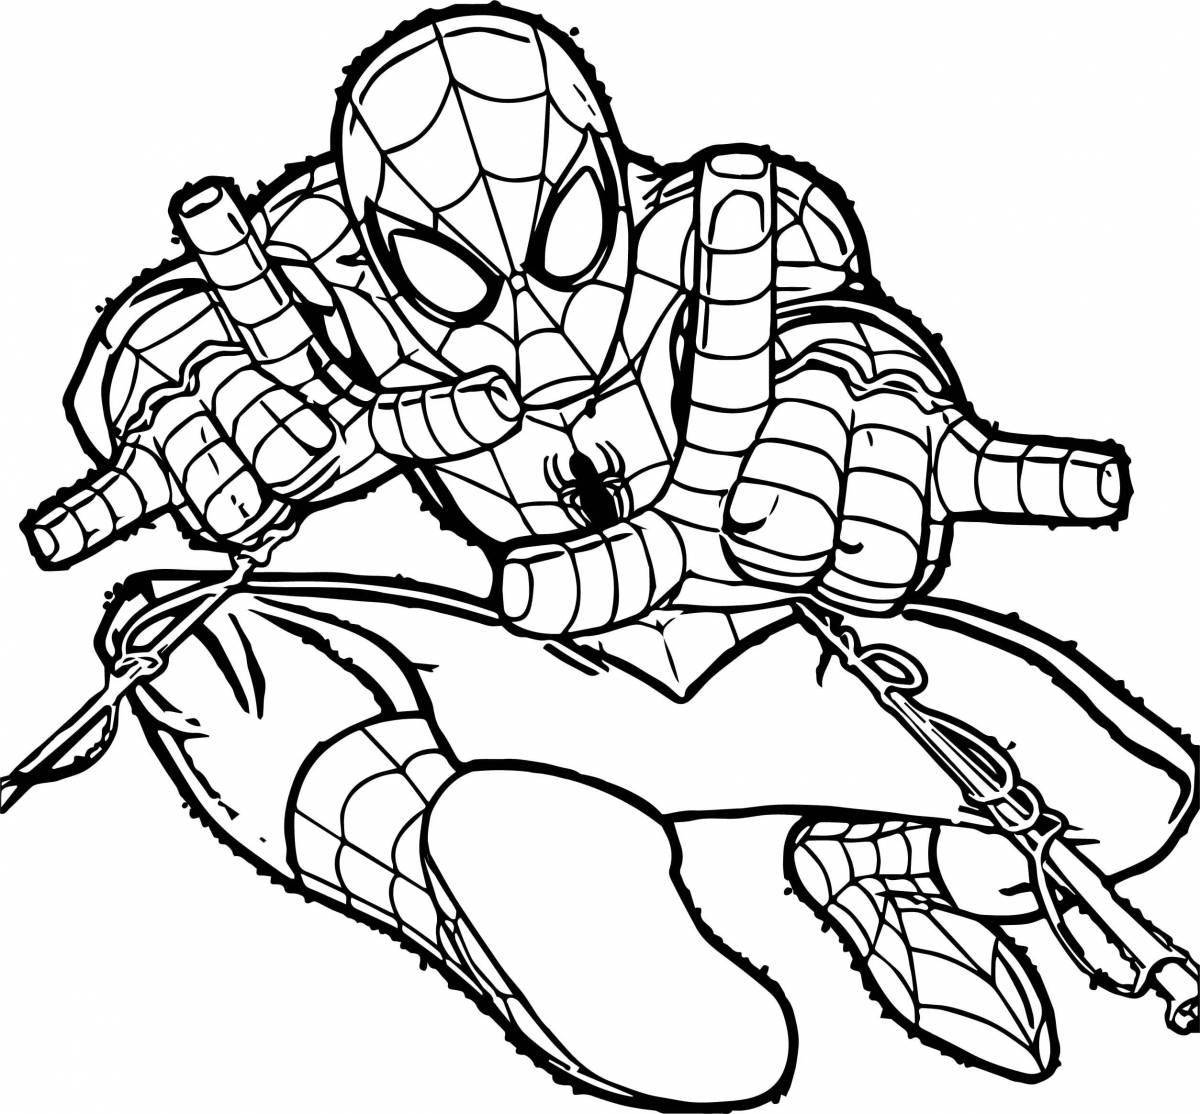 Spider-man creative coloring for kids